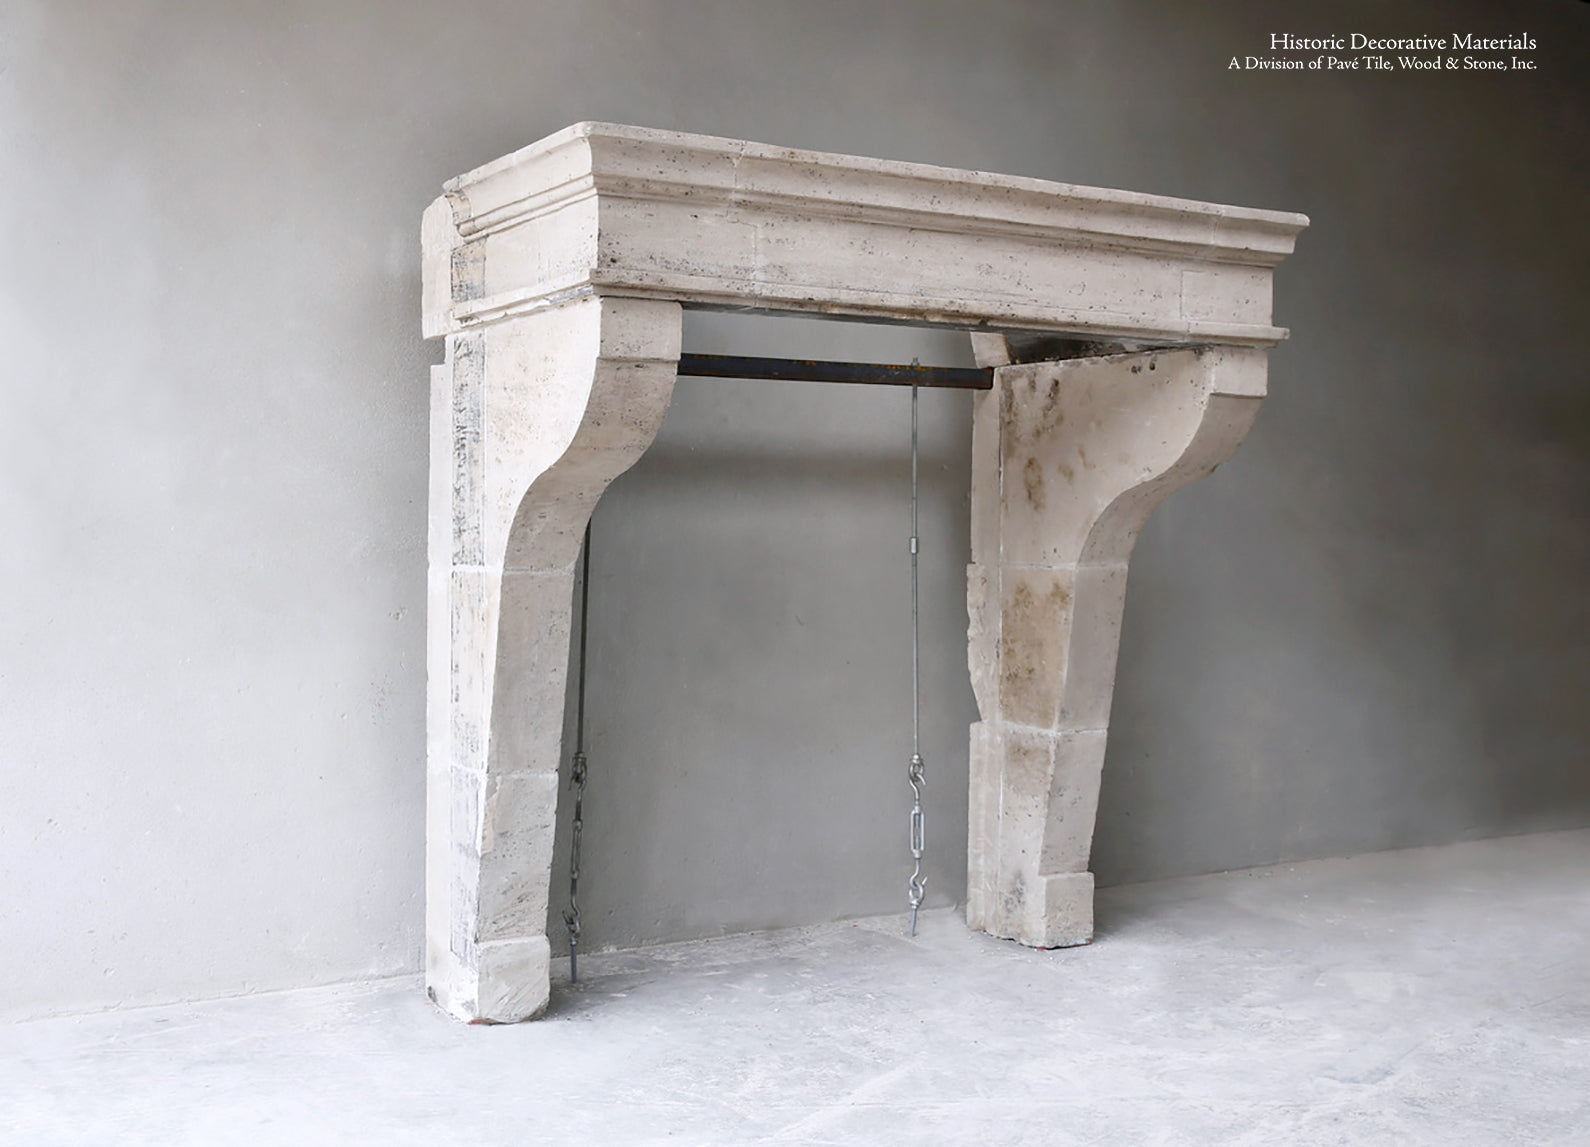 Antique French Limestone and Marble Fireplace Mantels for Interiors -  Historic Decorative Materials, a division of Pavé Tile, Wood & Stone, Inc.